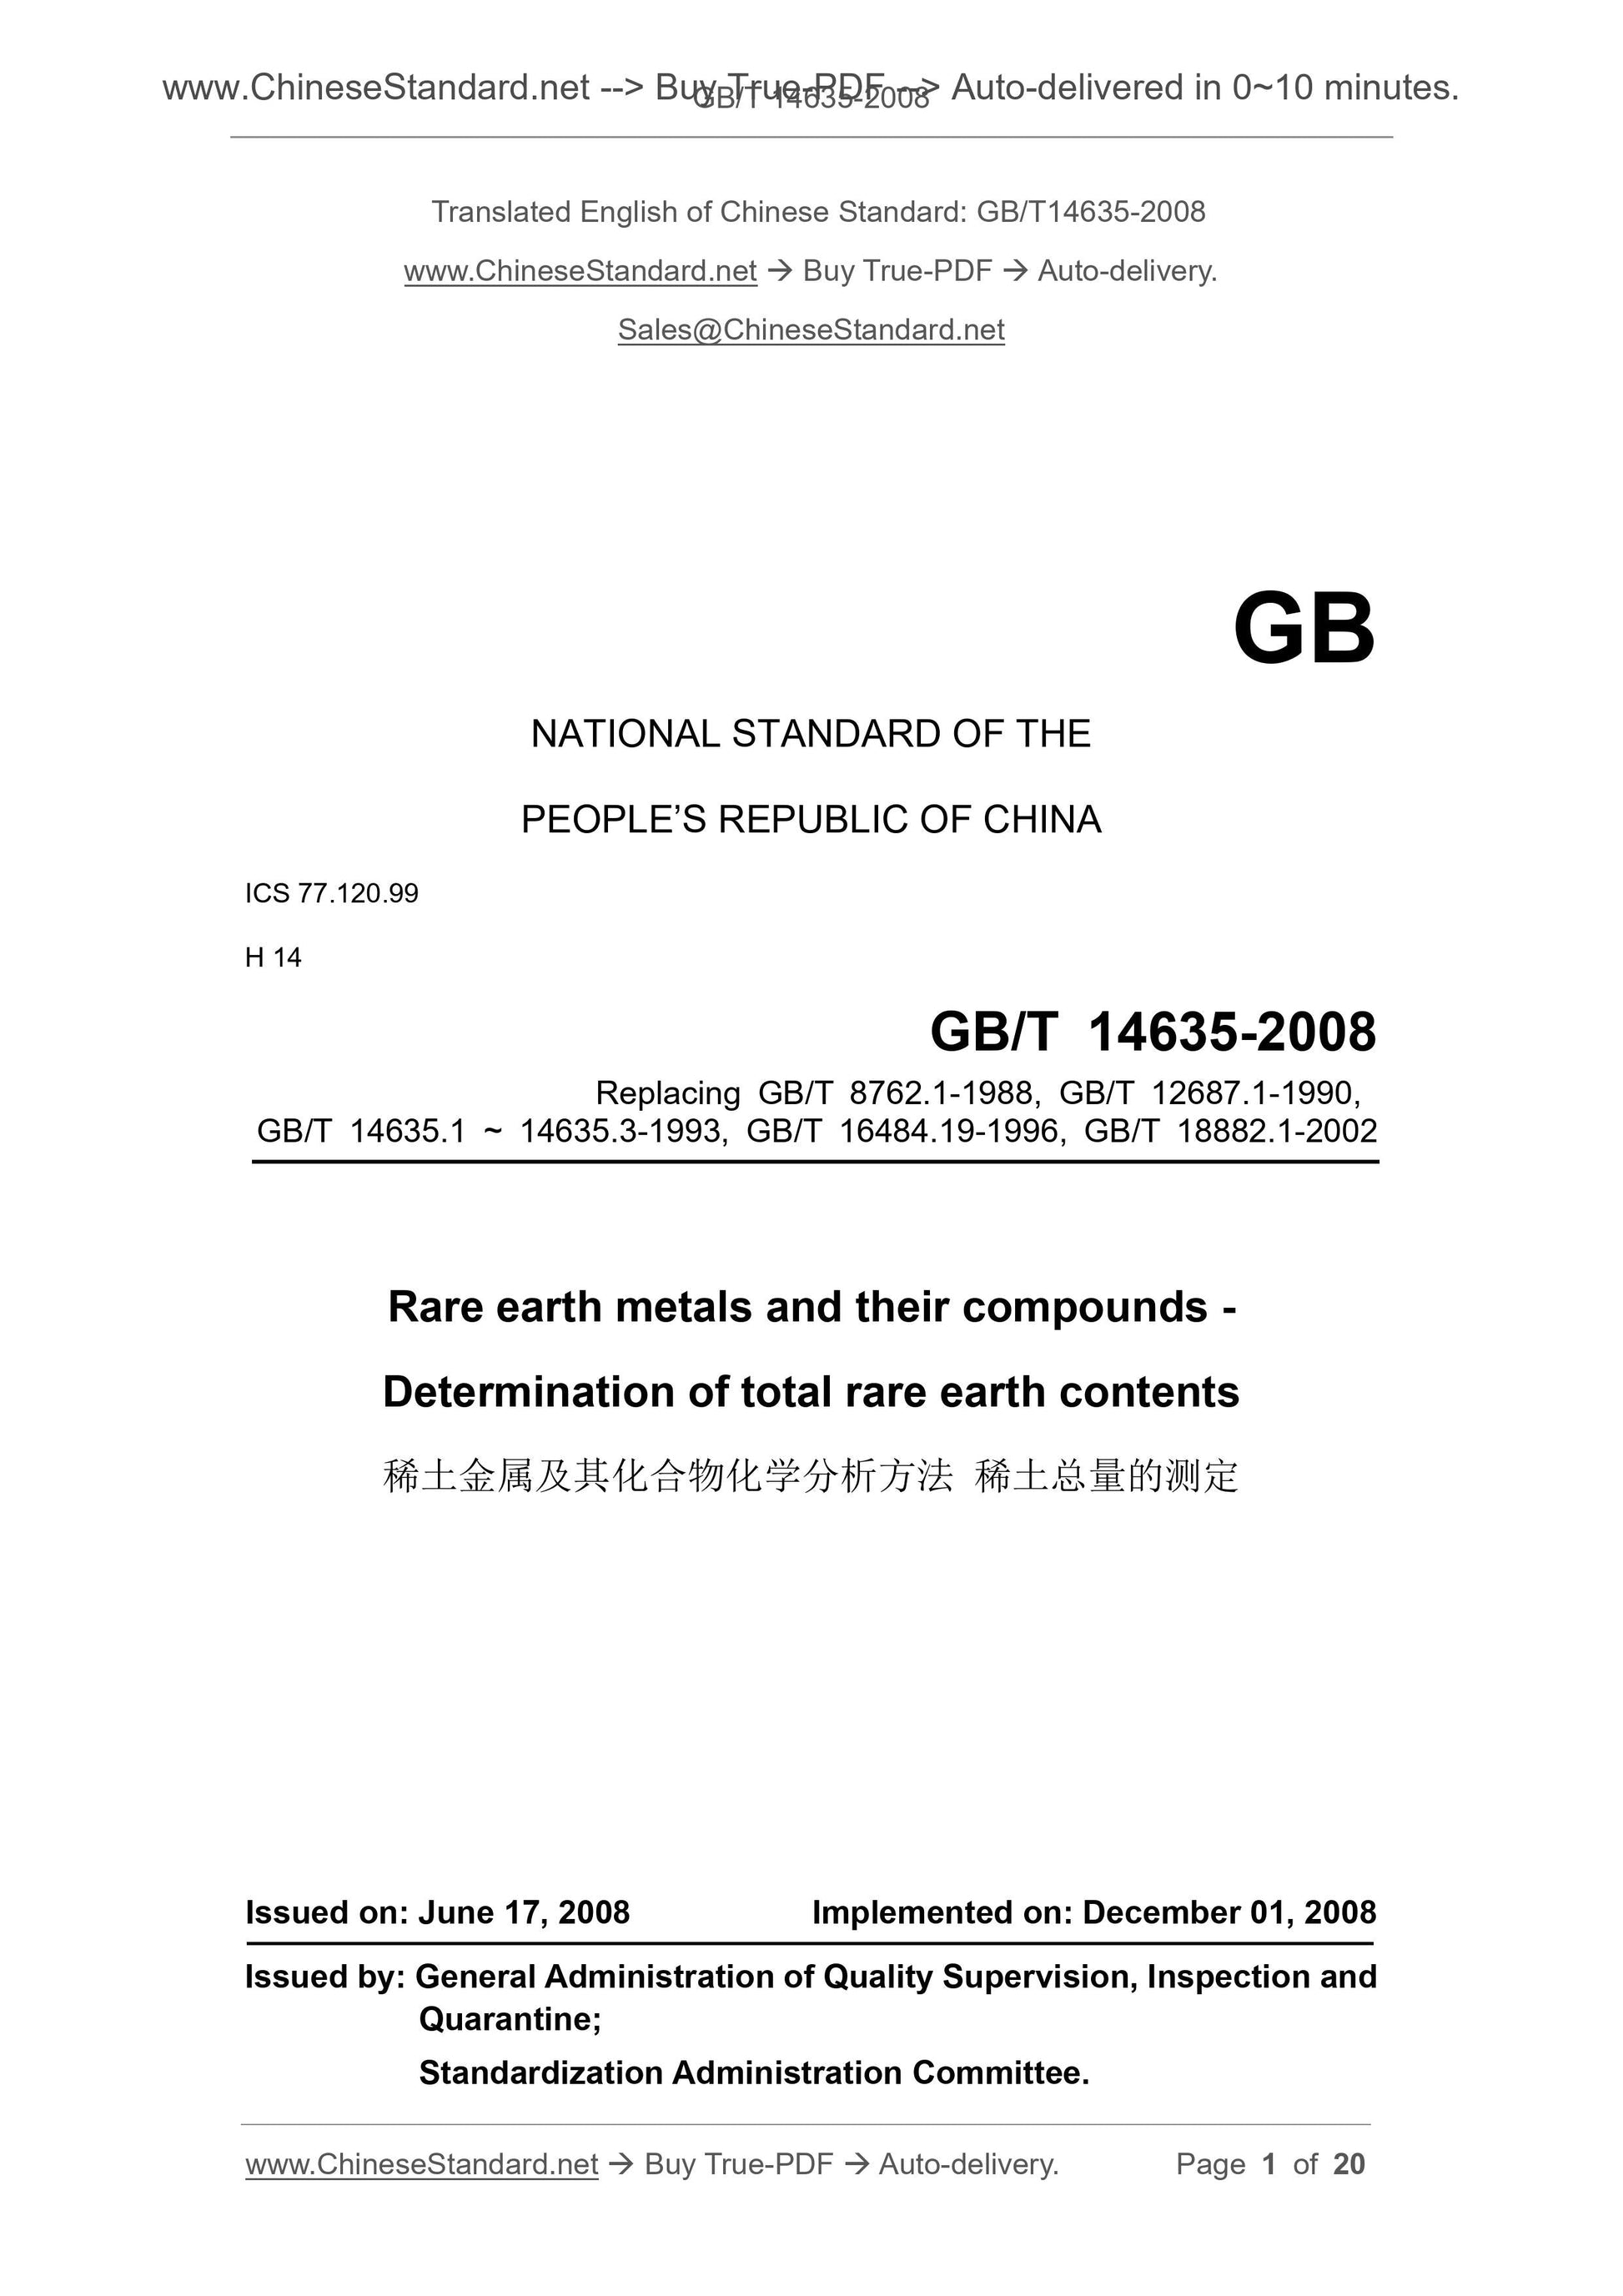 GB/T 14635-2008 Page 1